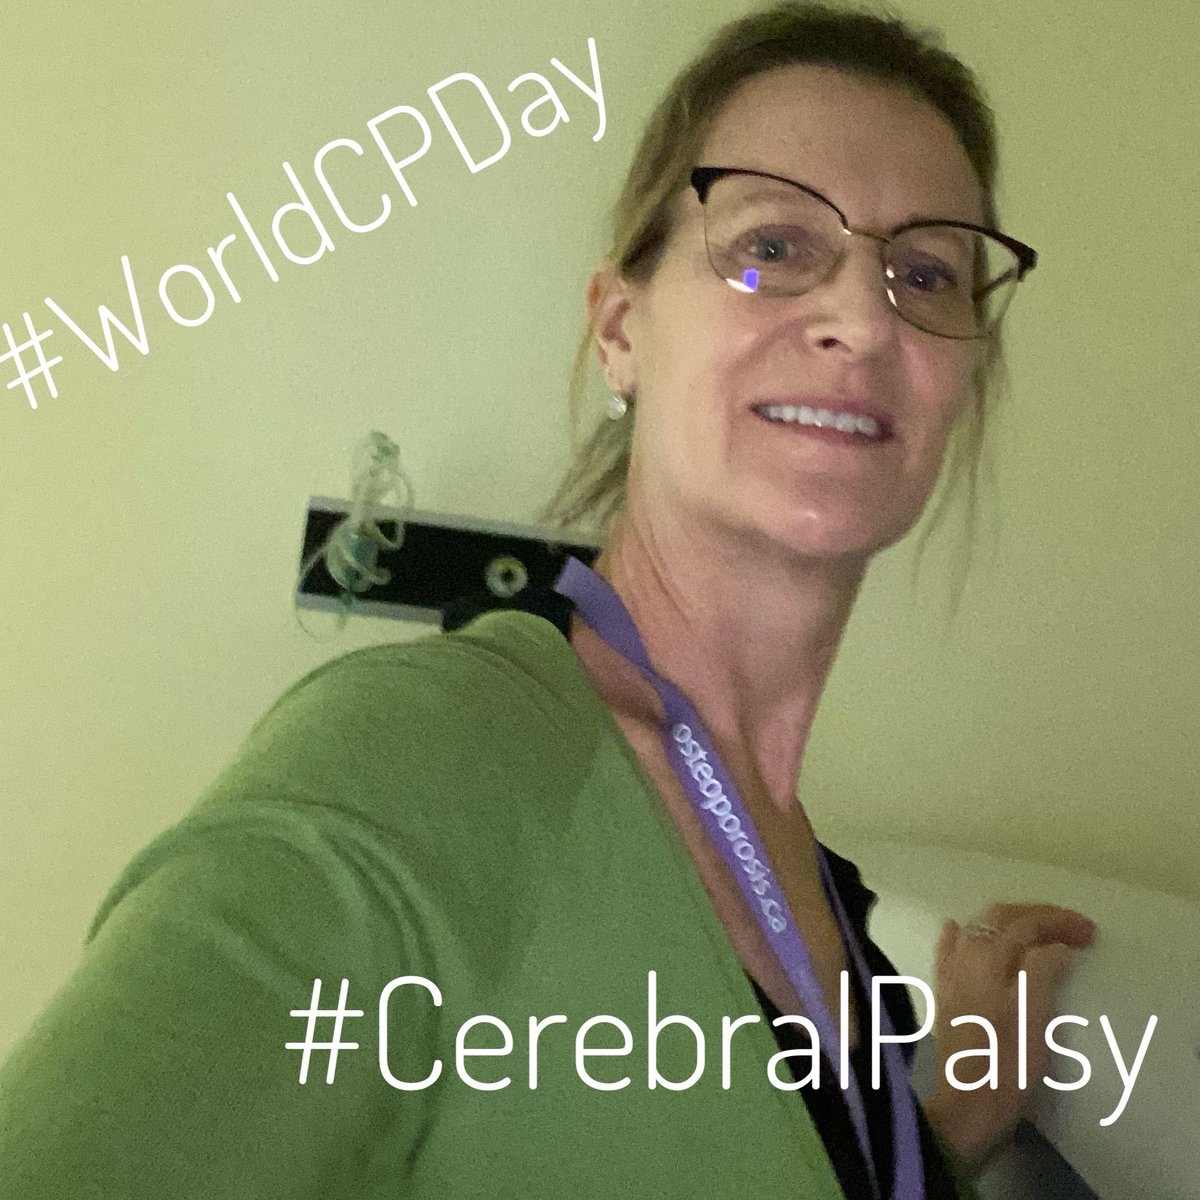 Today I am wearing green to raise awareness about #CerebralPalsy.  Happy #WorldCPDay. Hope you sporting some green ✅